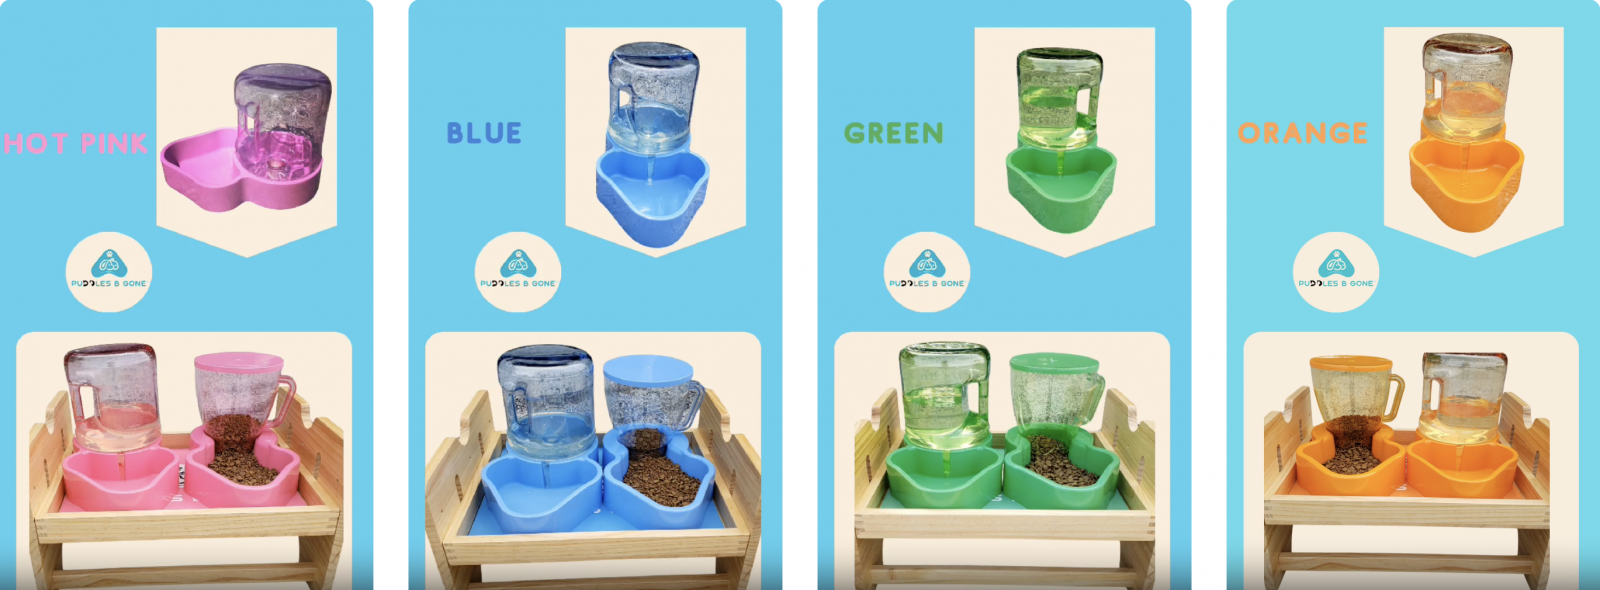 5 Reasons Pet Owners Love Our Spill-Proof Pet Bowls